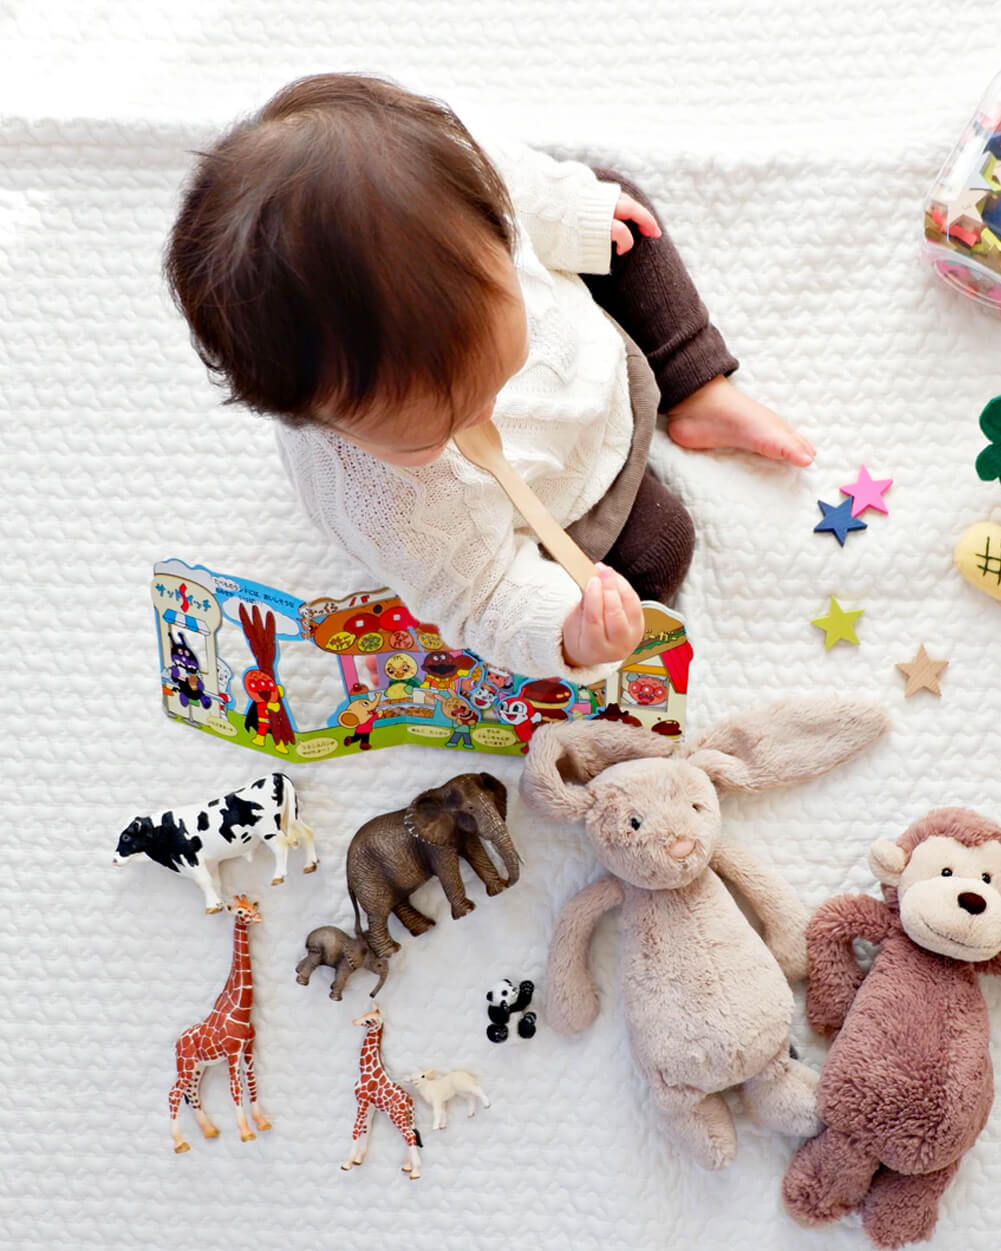 Infant sitting on a blanked playing with toys